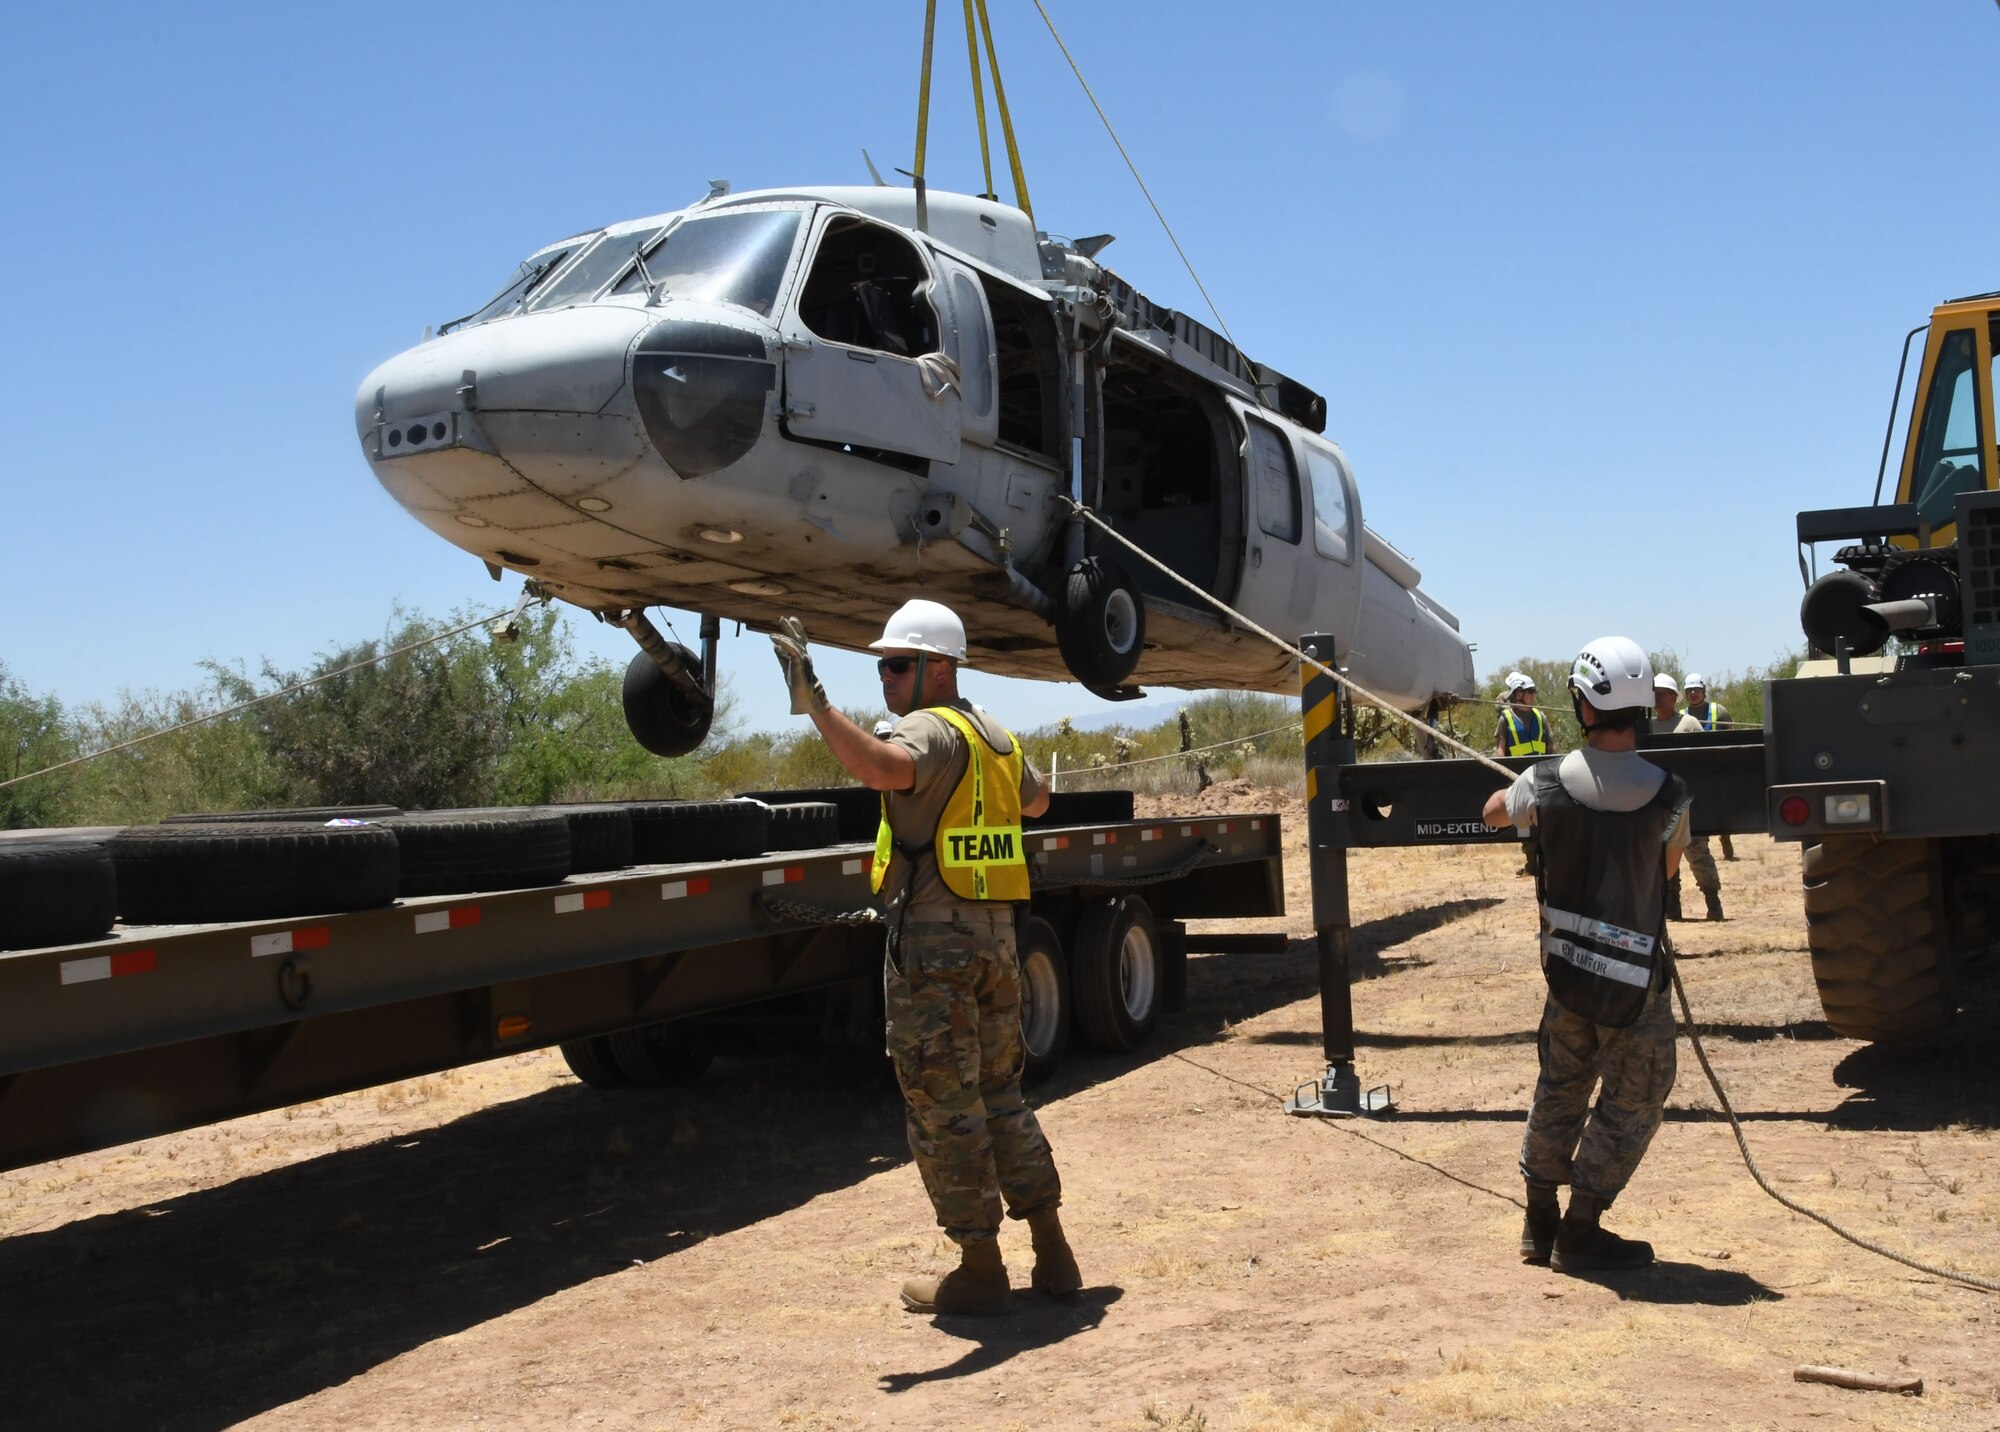 An Airman guides a helicopter onto a truck.